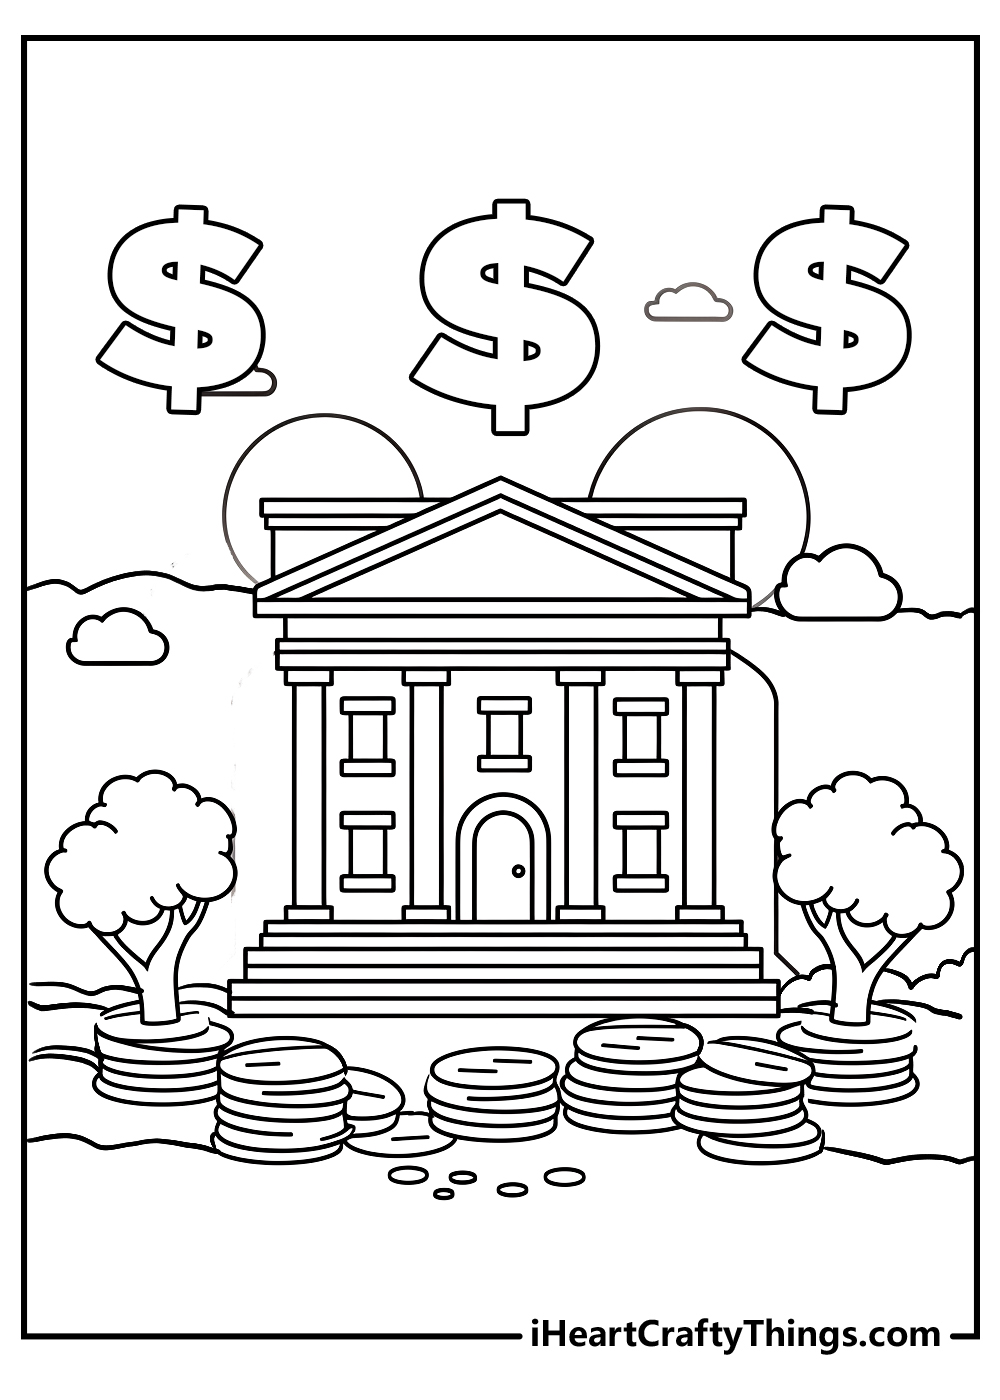 Printable money coloring pages updated